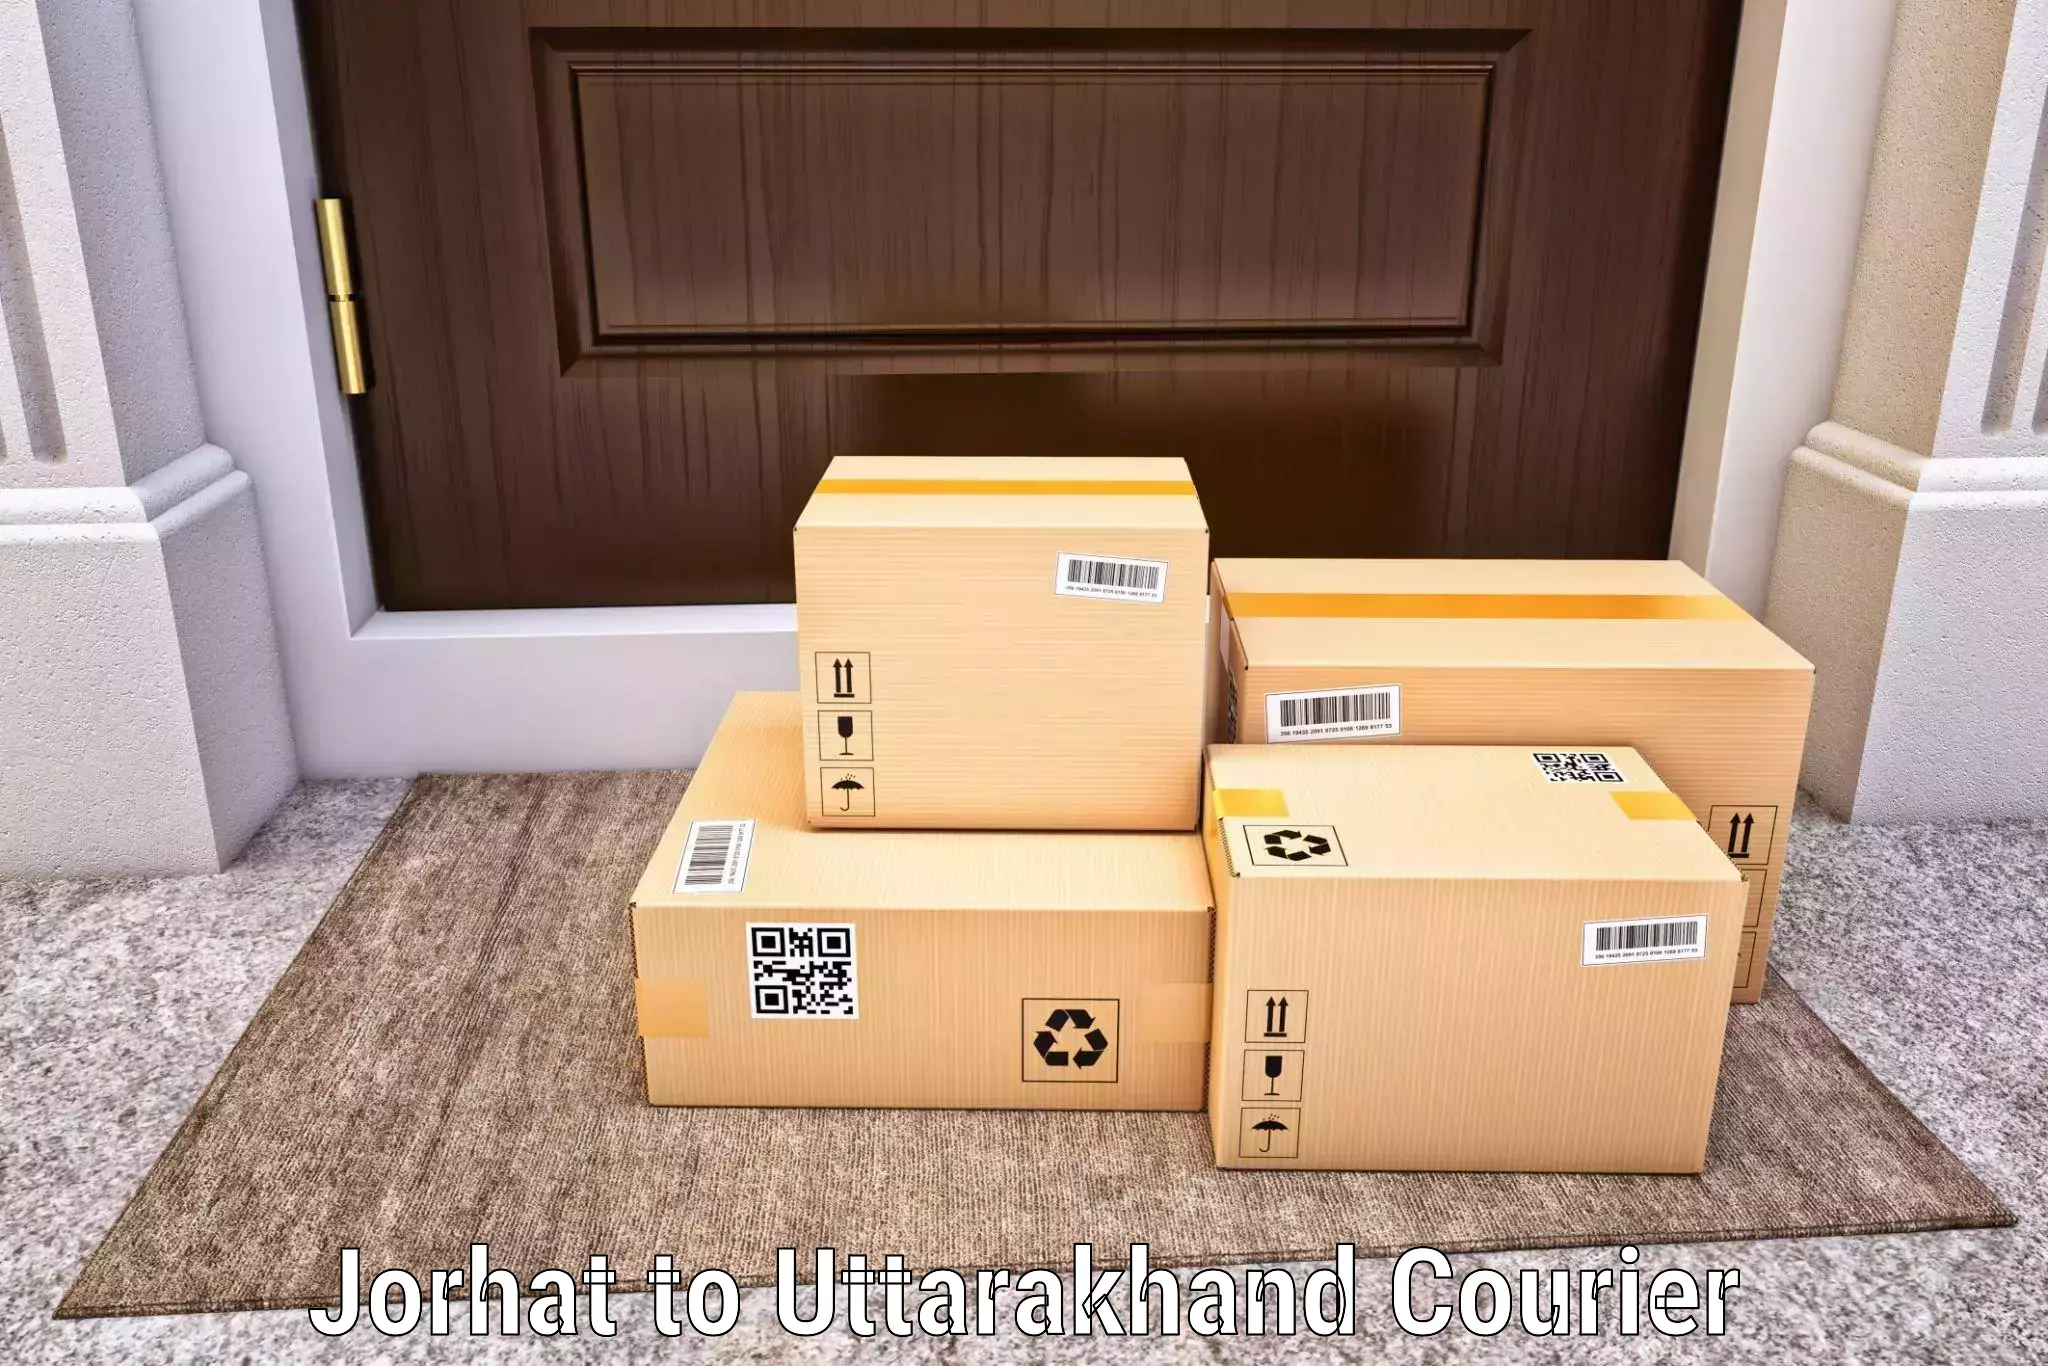 Urban courier service in Jorhat to Almora